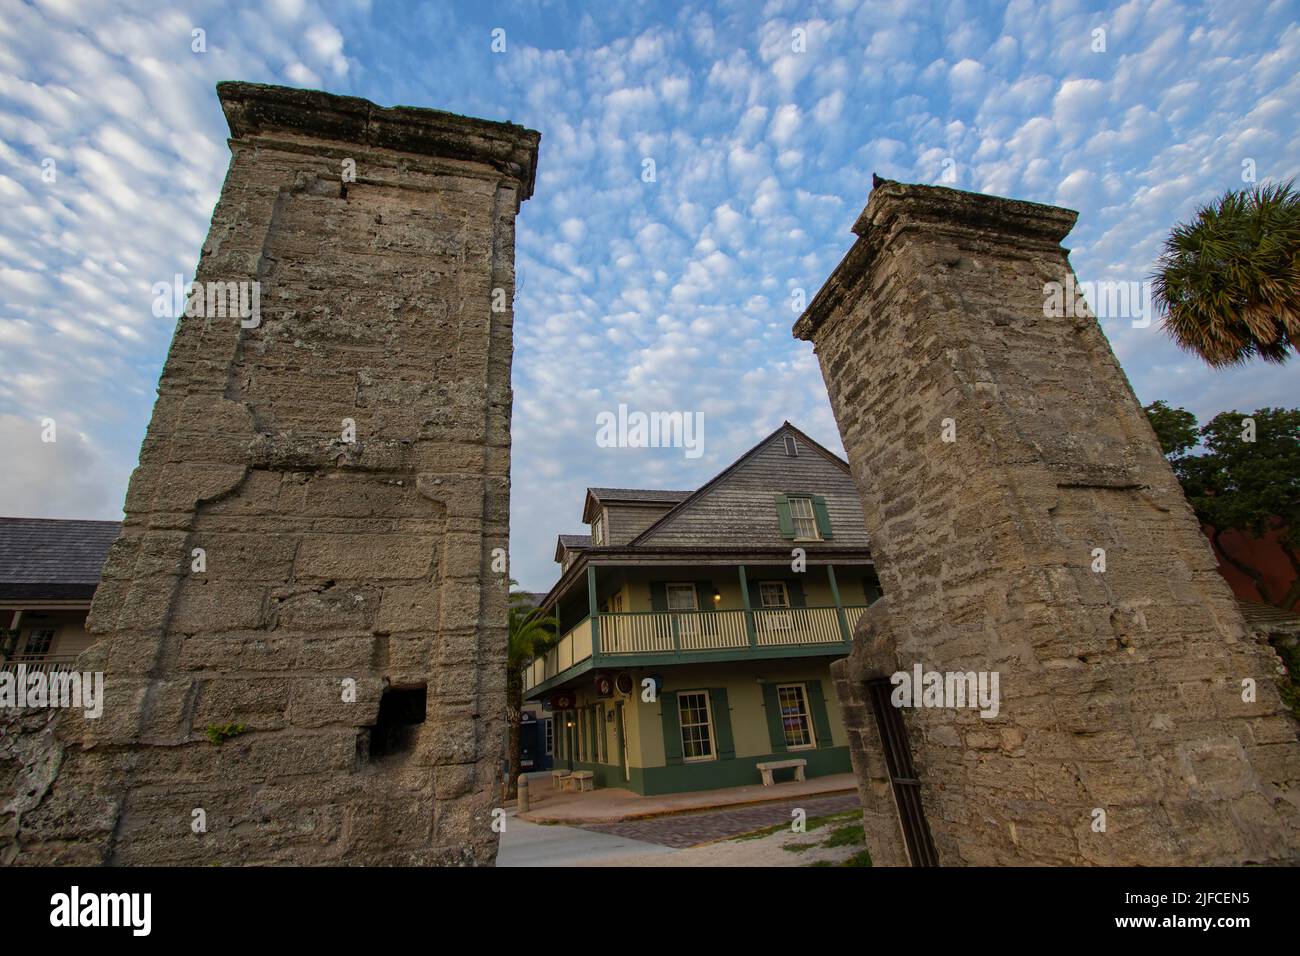 The historic City Gate of St. Augustine, Florida erected in 1808 Stock Photo